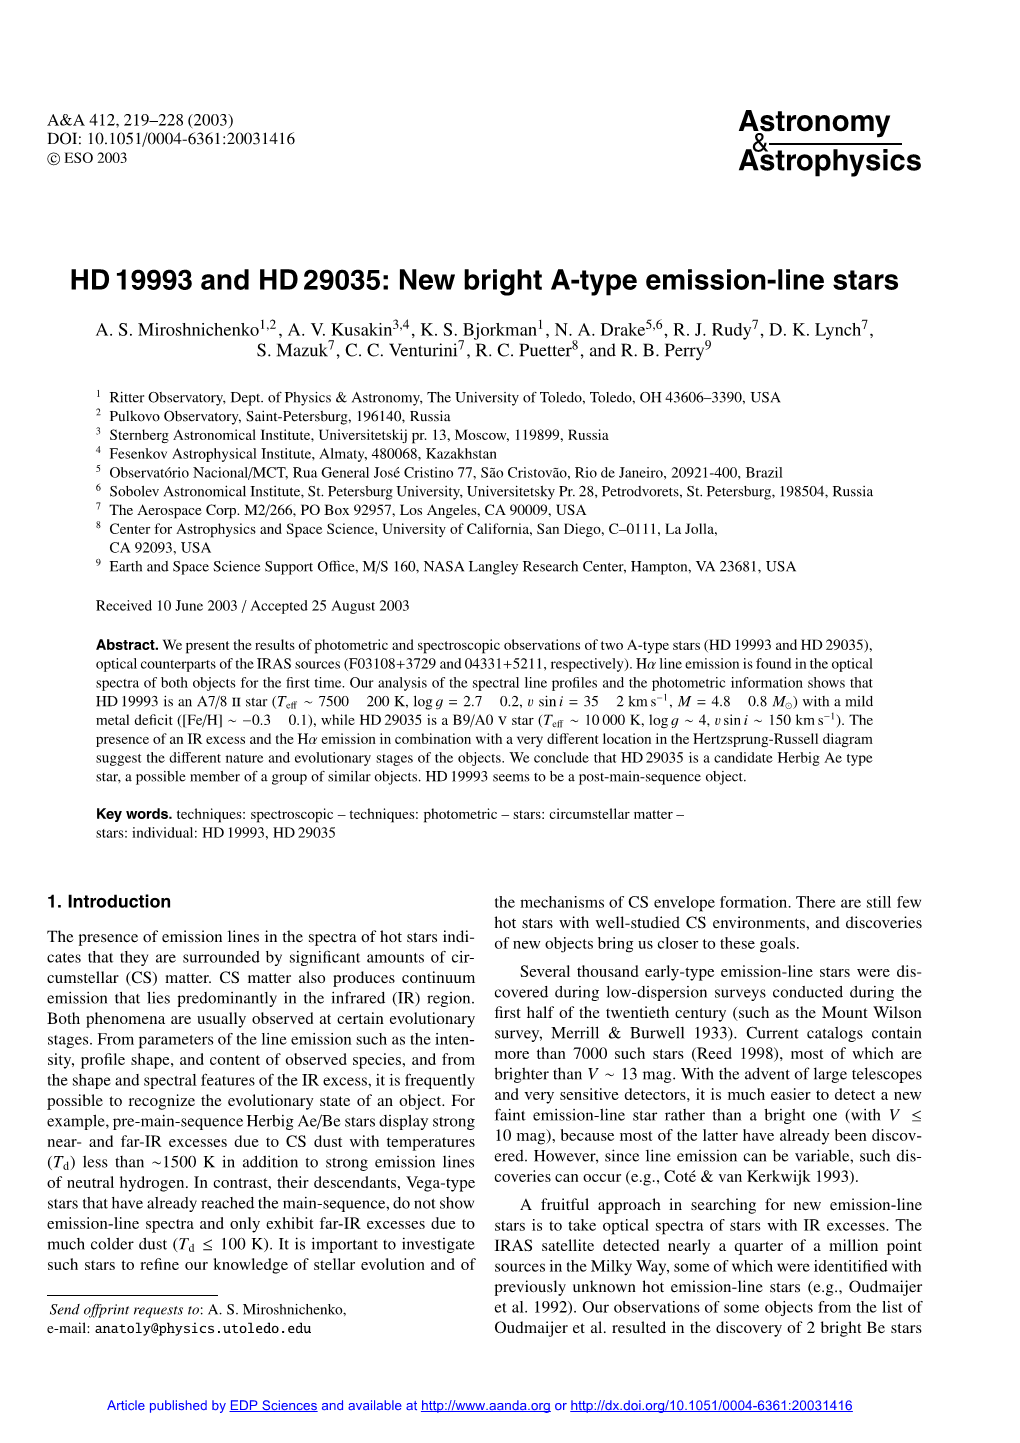 HD 19993 and HD 29035: New Bright A-Type Emission-Line Stars